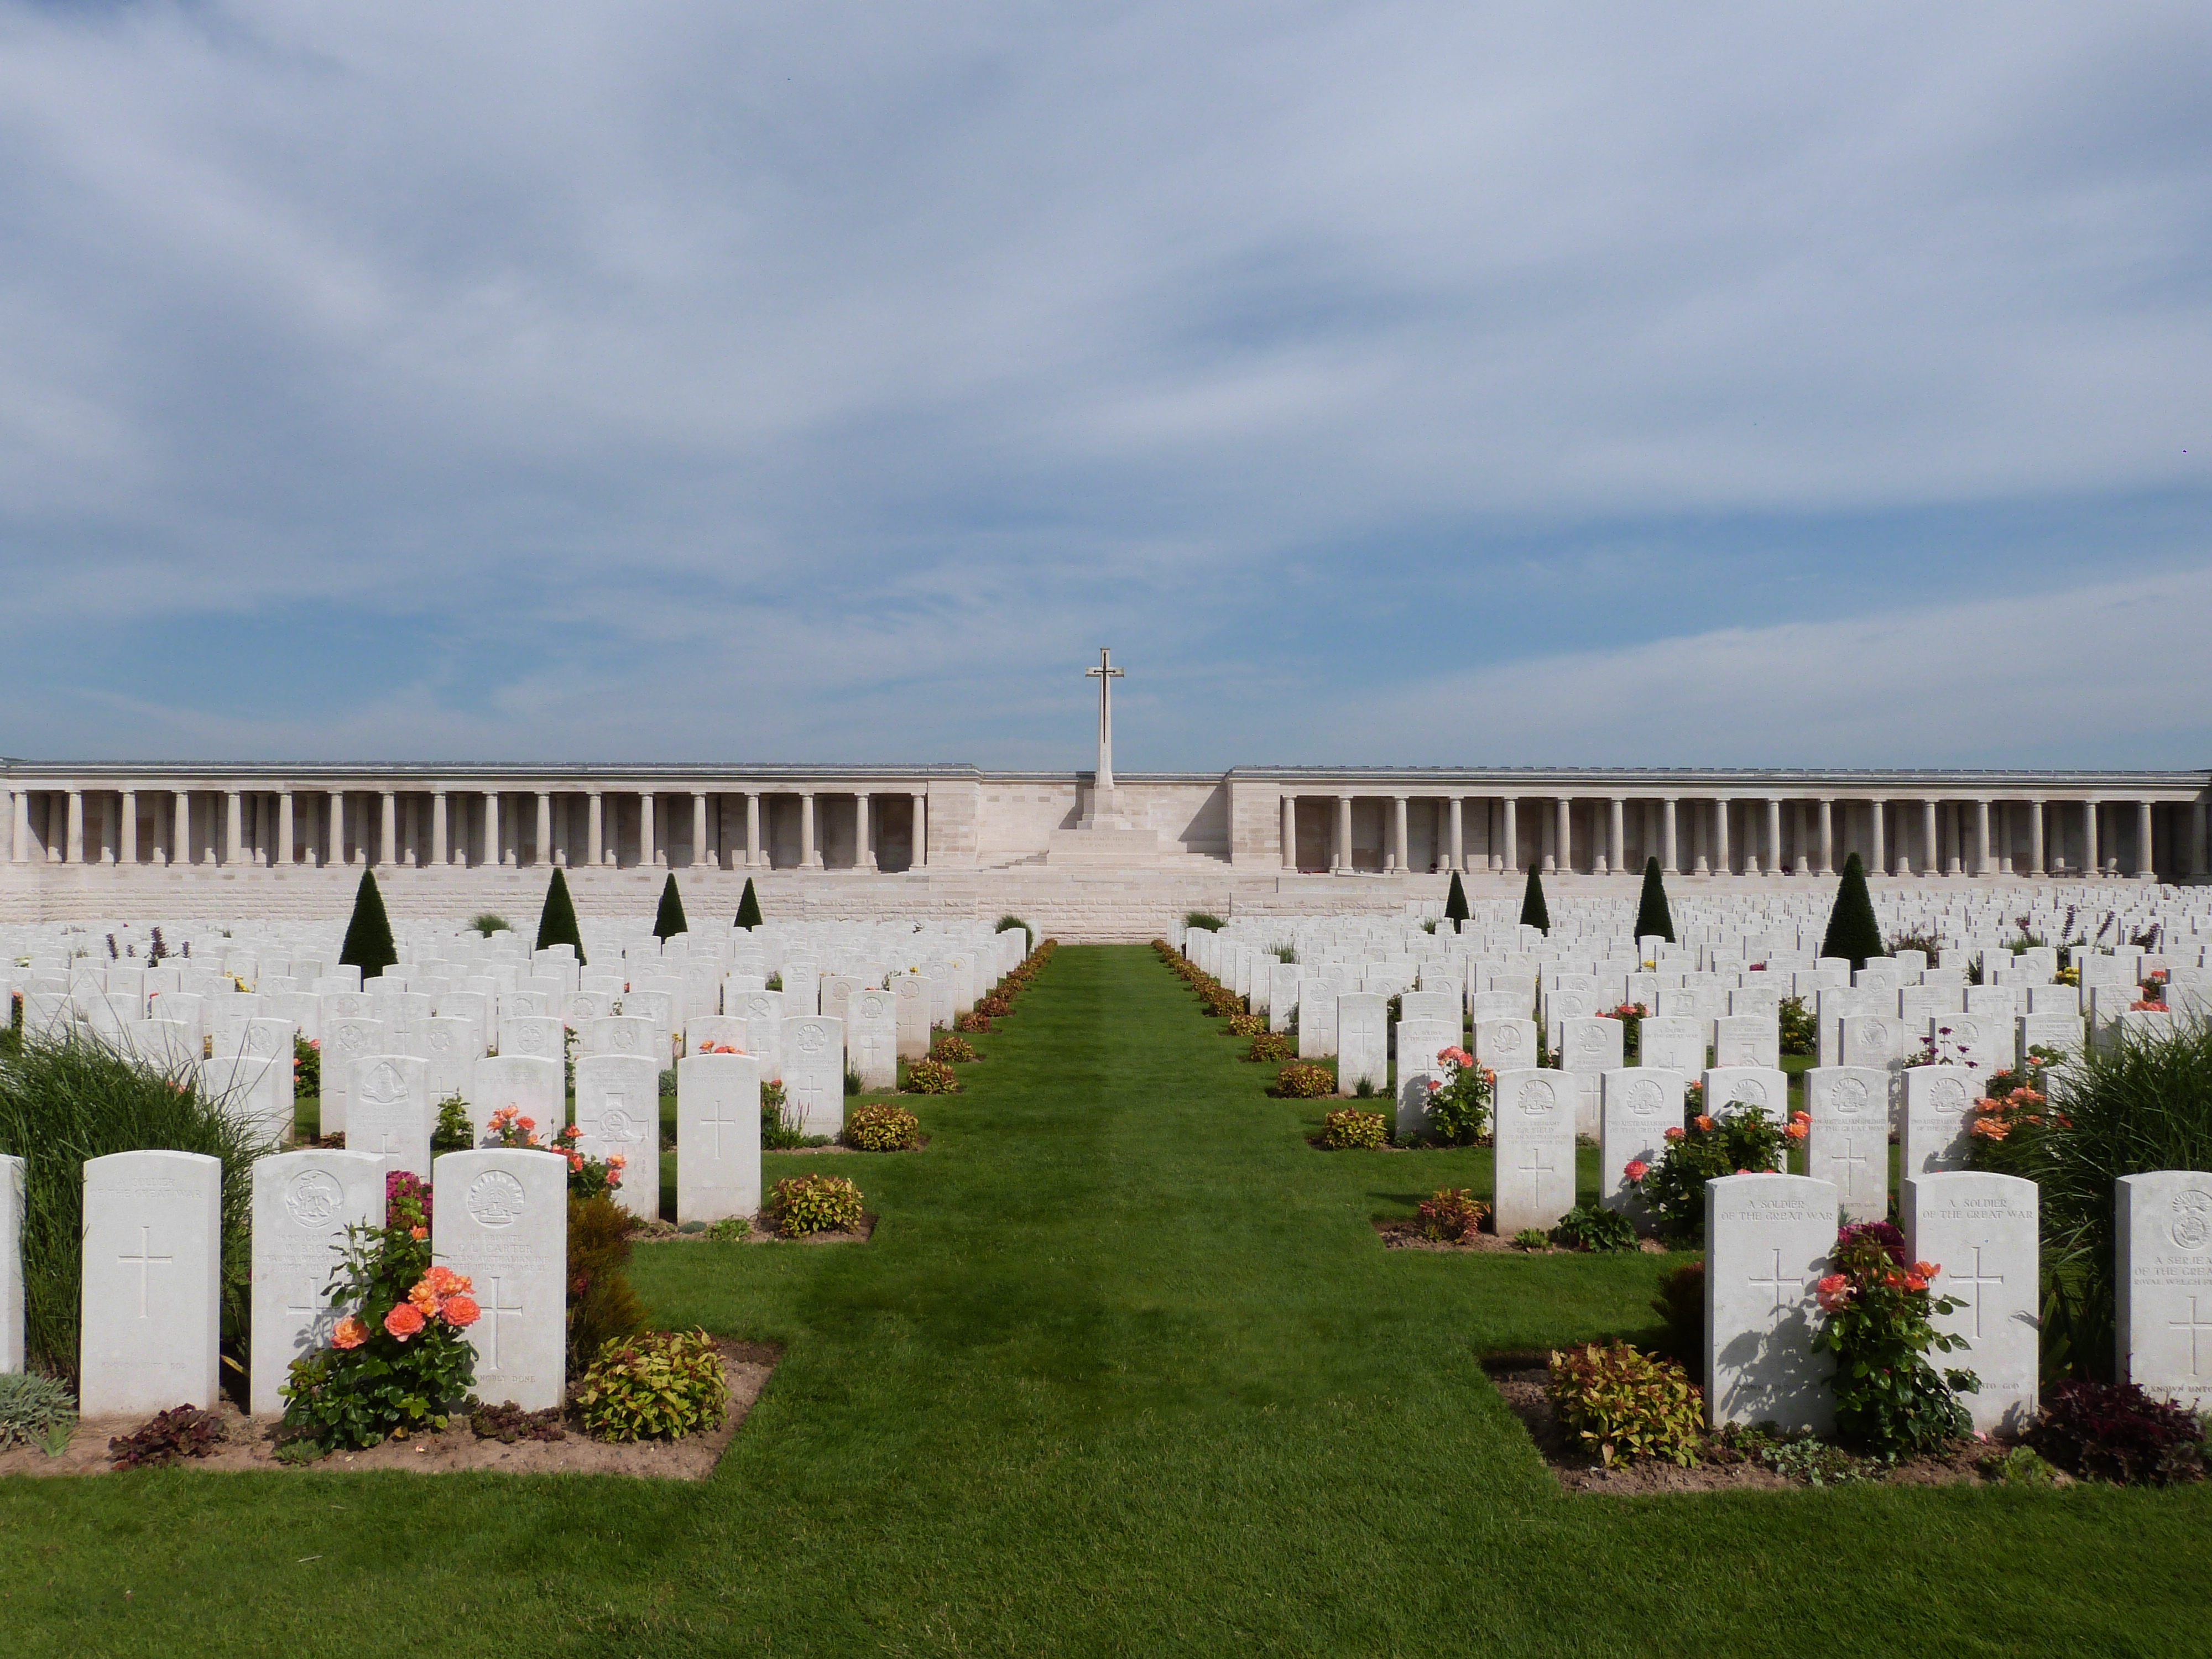 Graves at a British Military Cemetery in the Somme